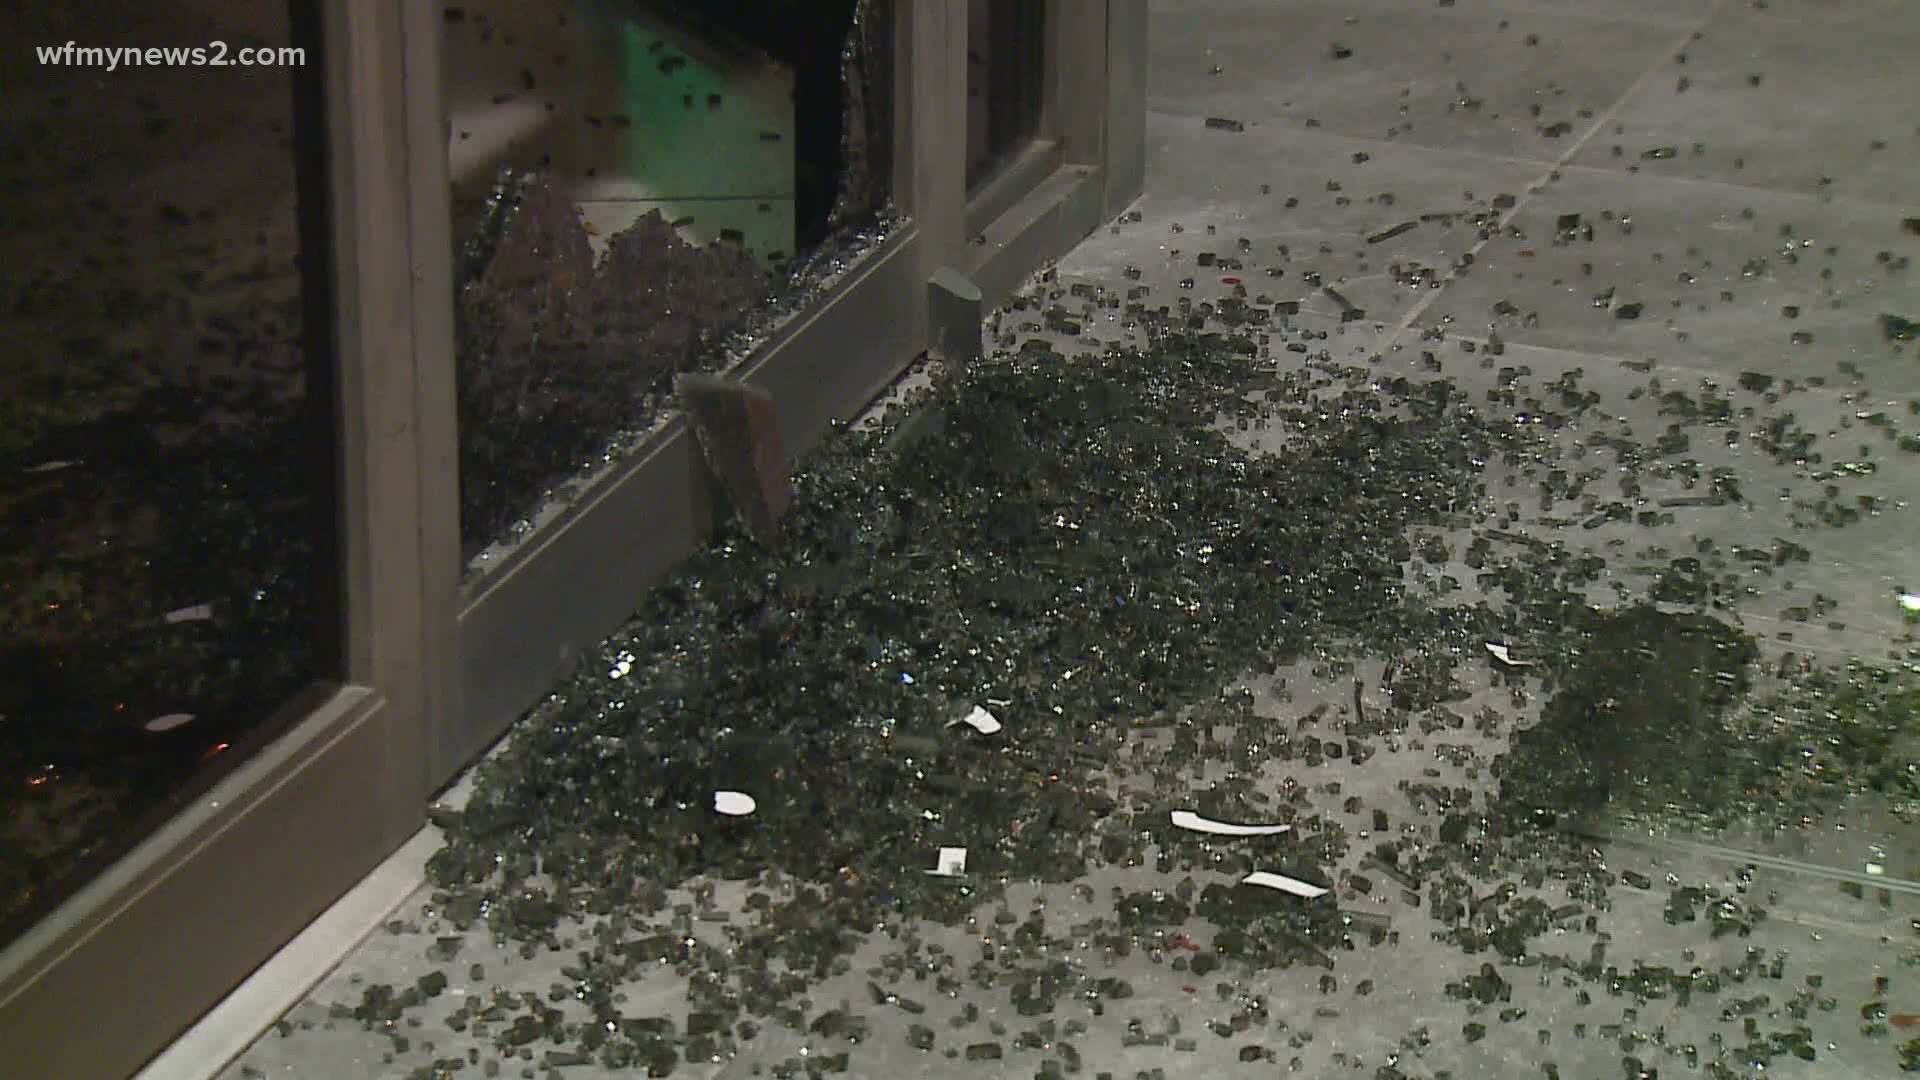 Peaceful protests over the weekend turned violent at night. Dozens of store fronts were damaged.